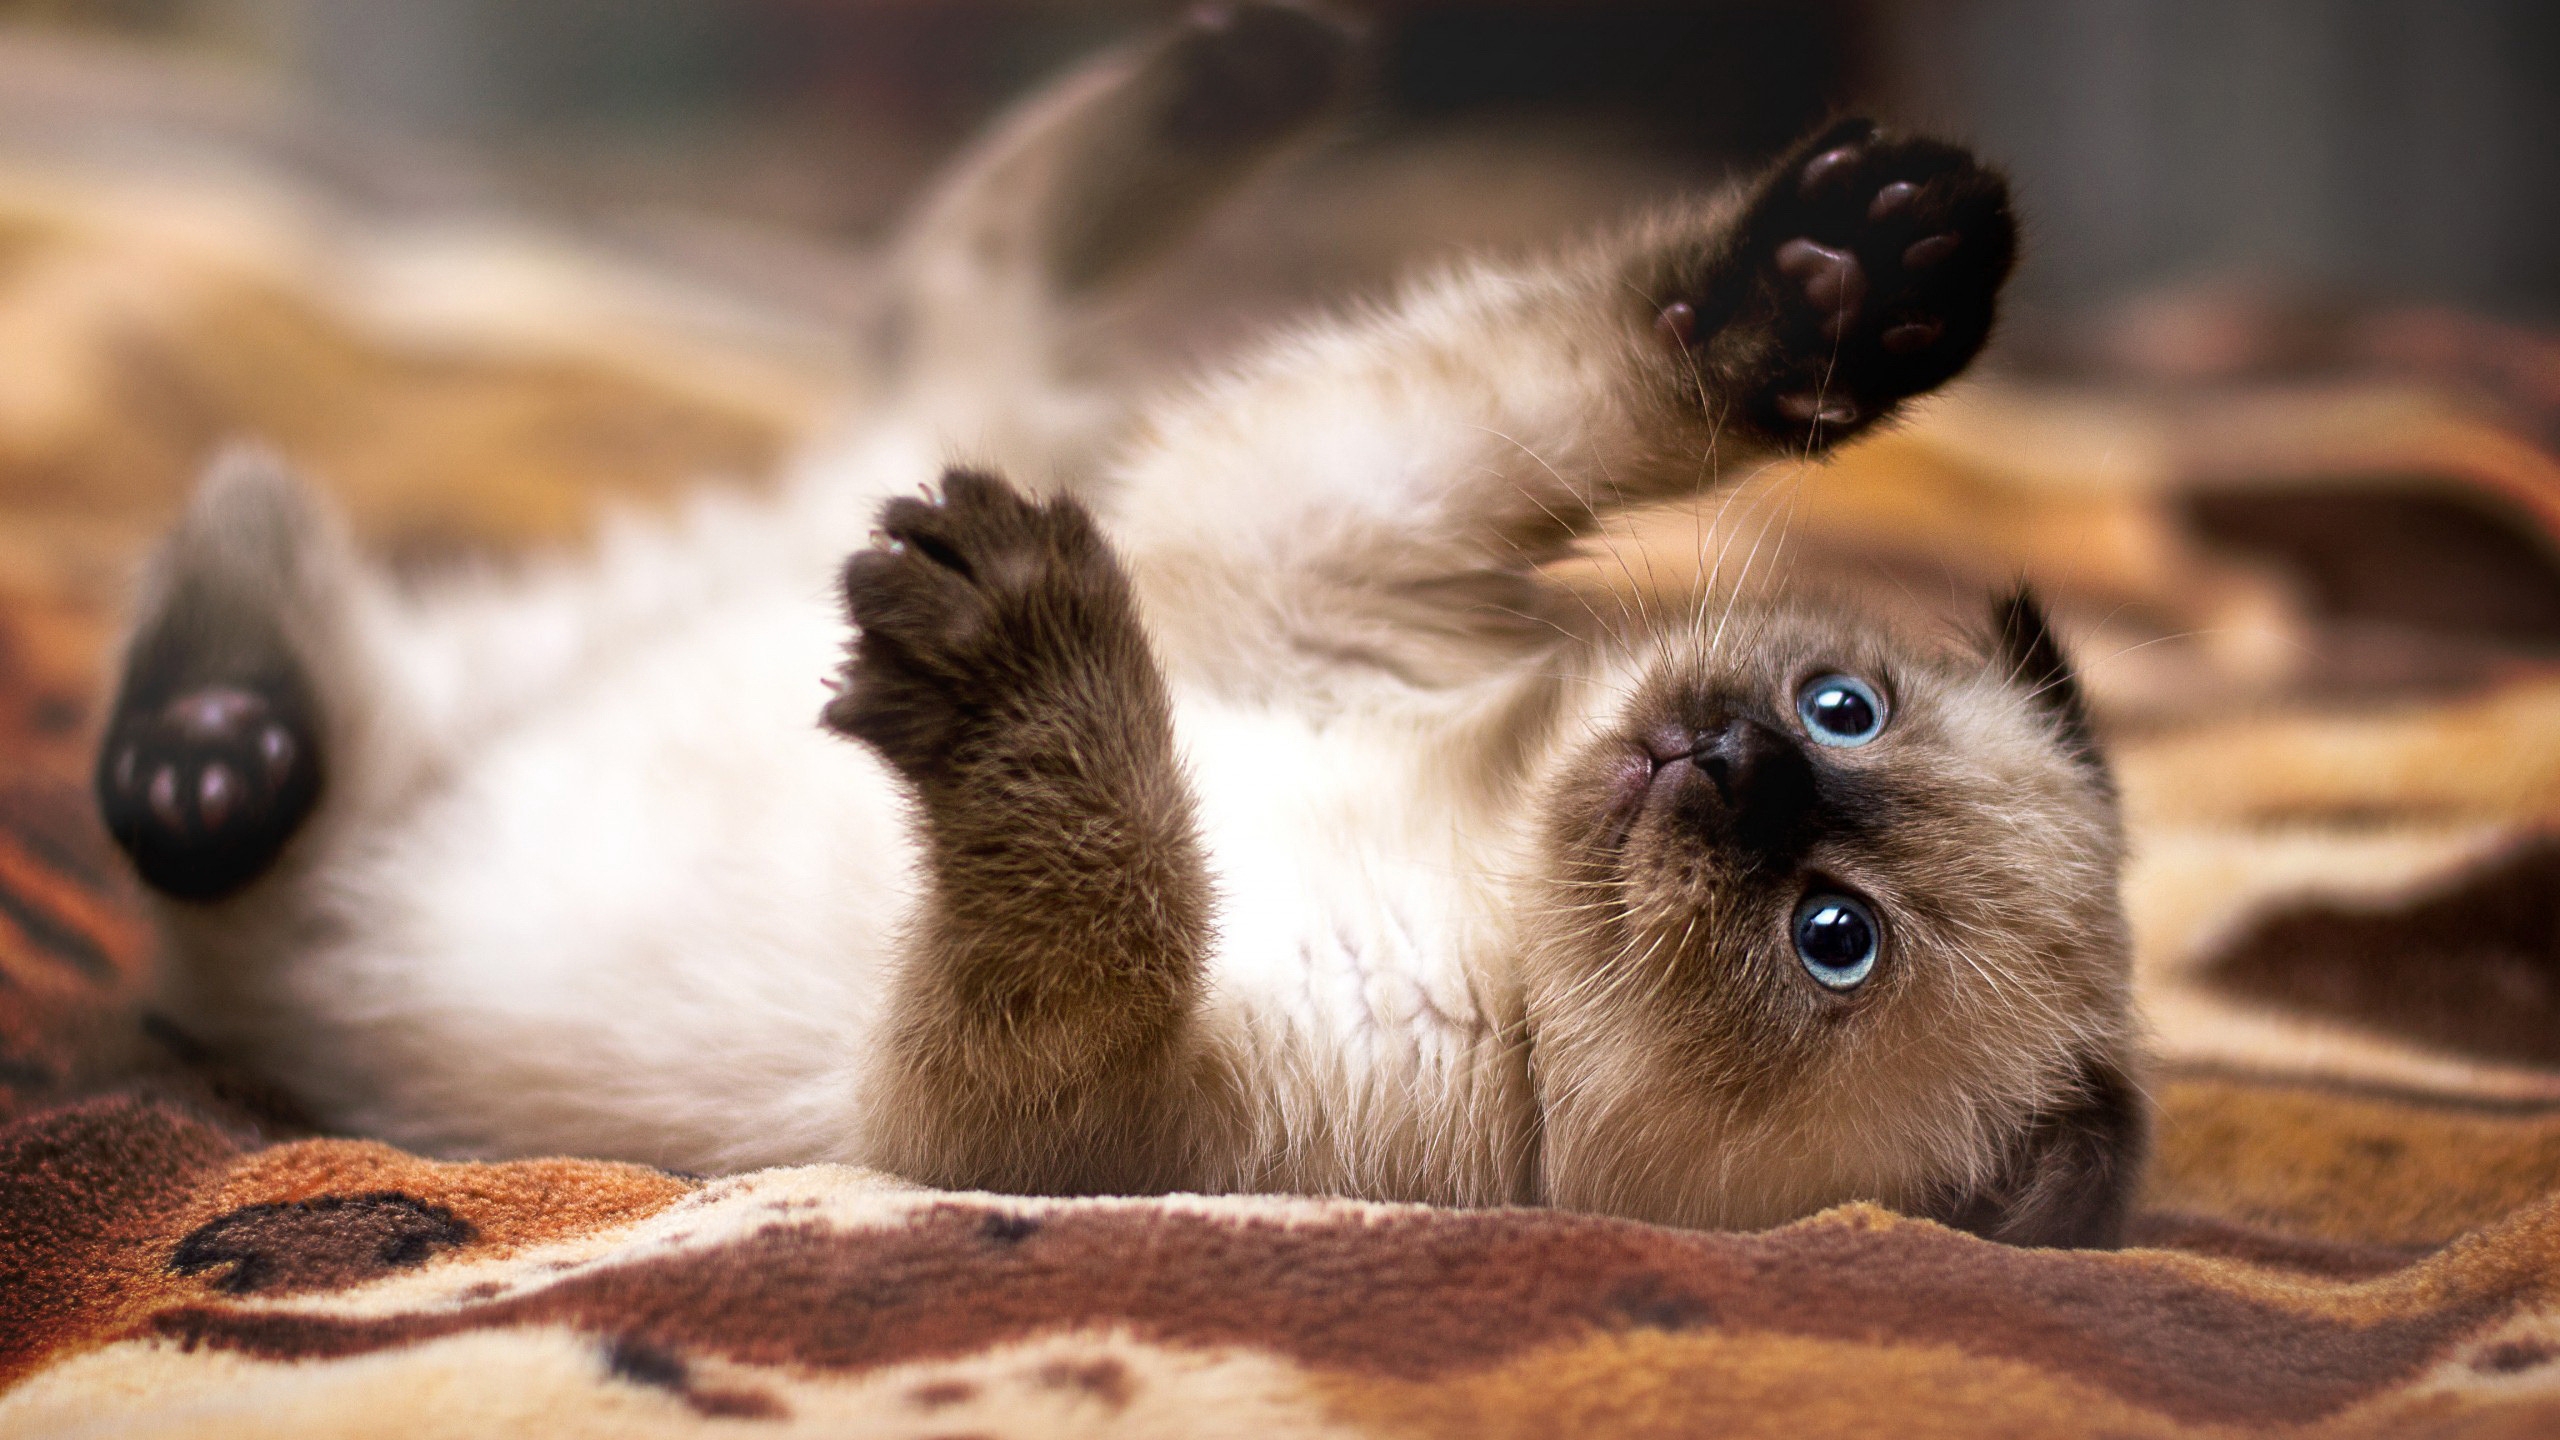 Siamese baby cat for 2560x1440 HDTV resolution